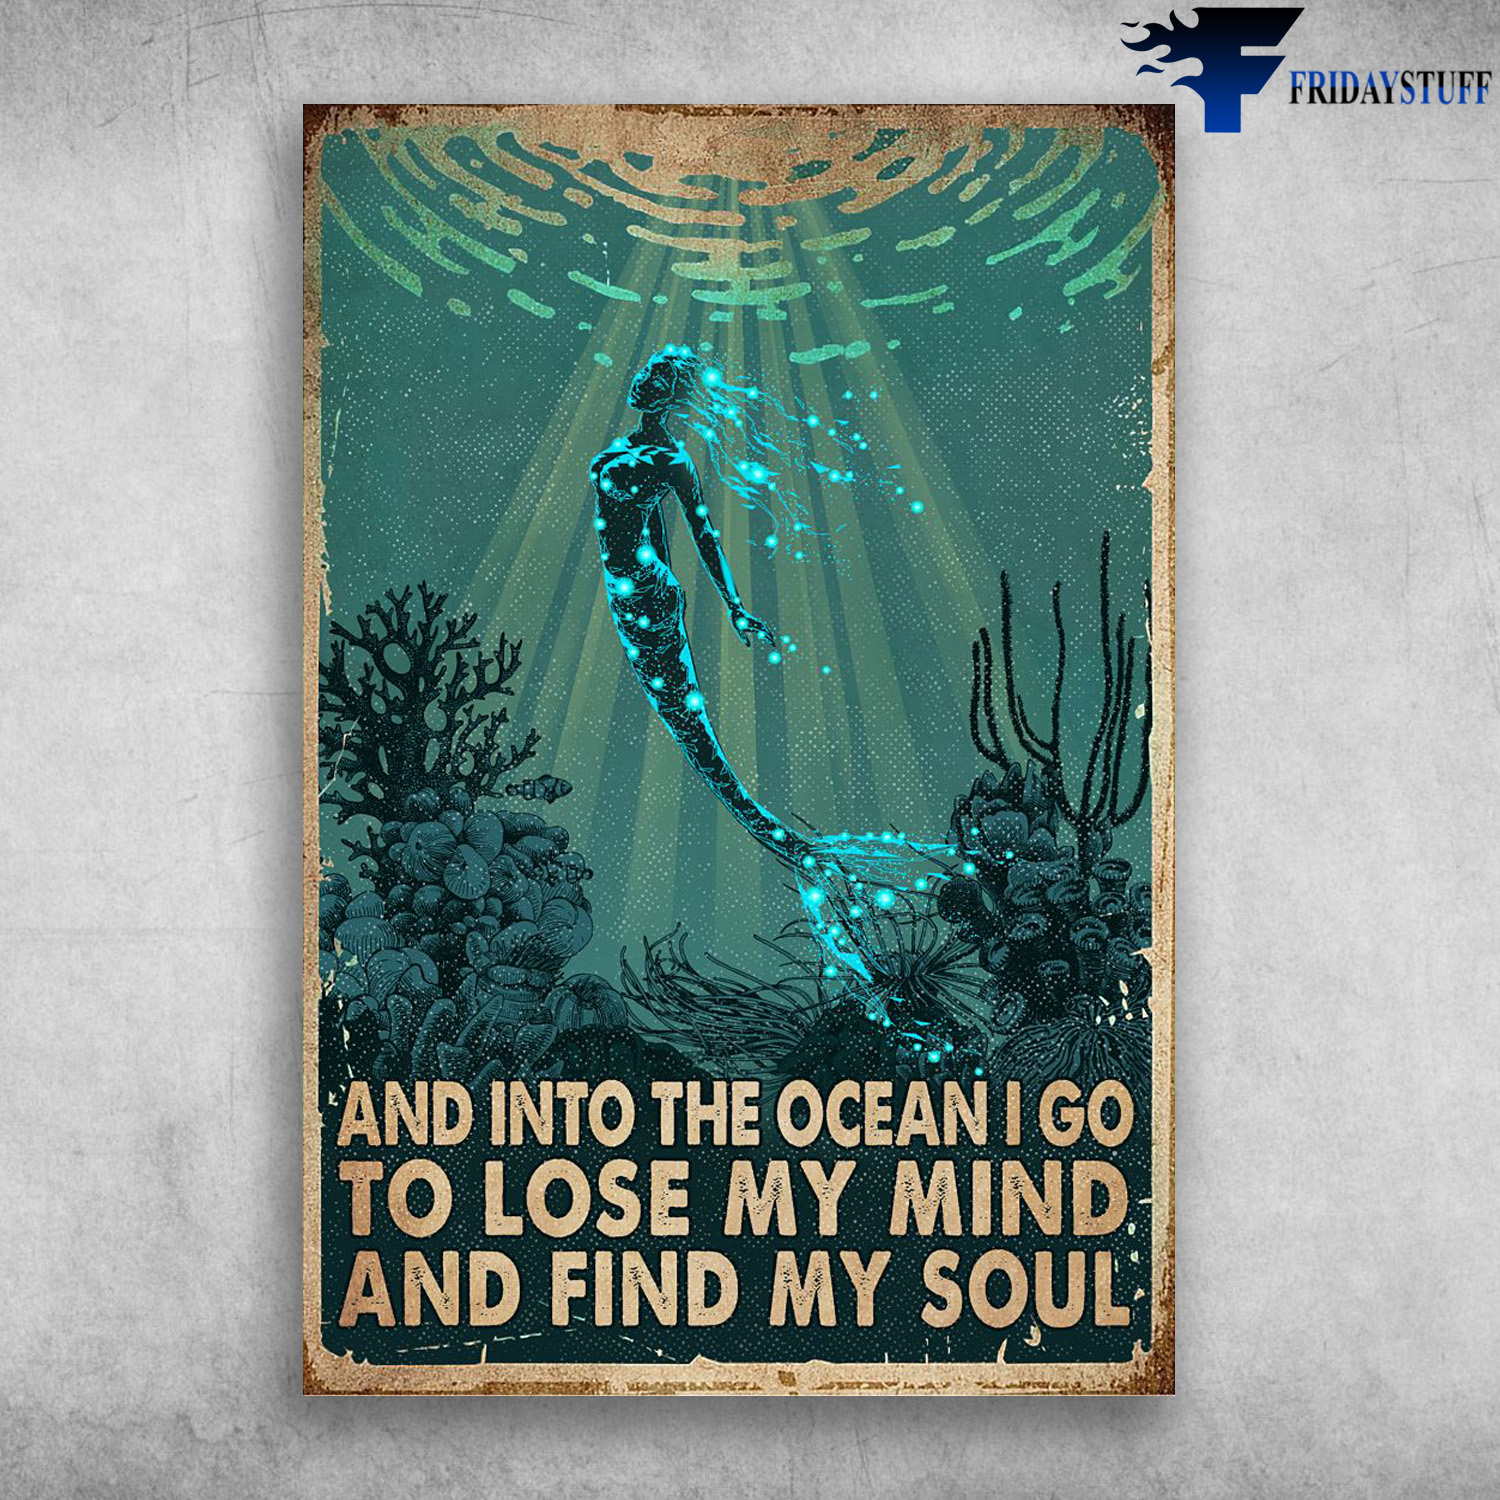 Mermaid In The Ocean - And Into The Ocean, I Go To Lose My Mind And Find My Soul